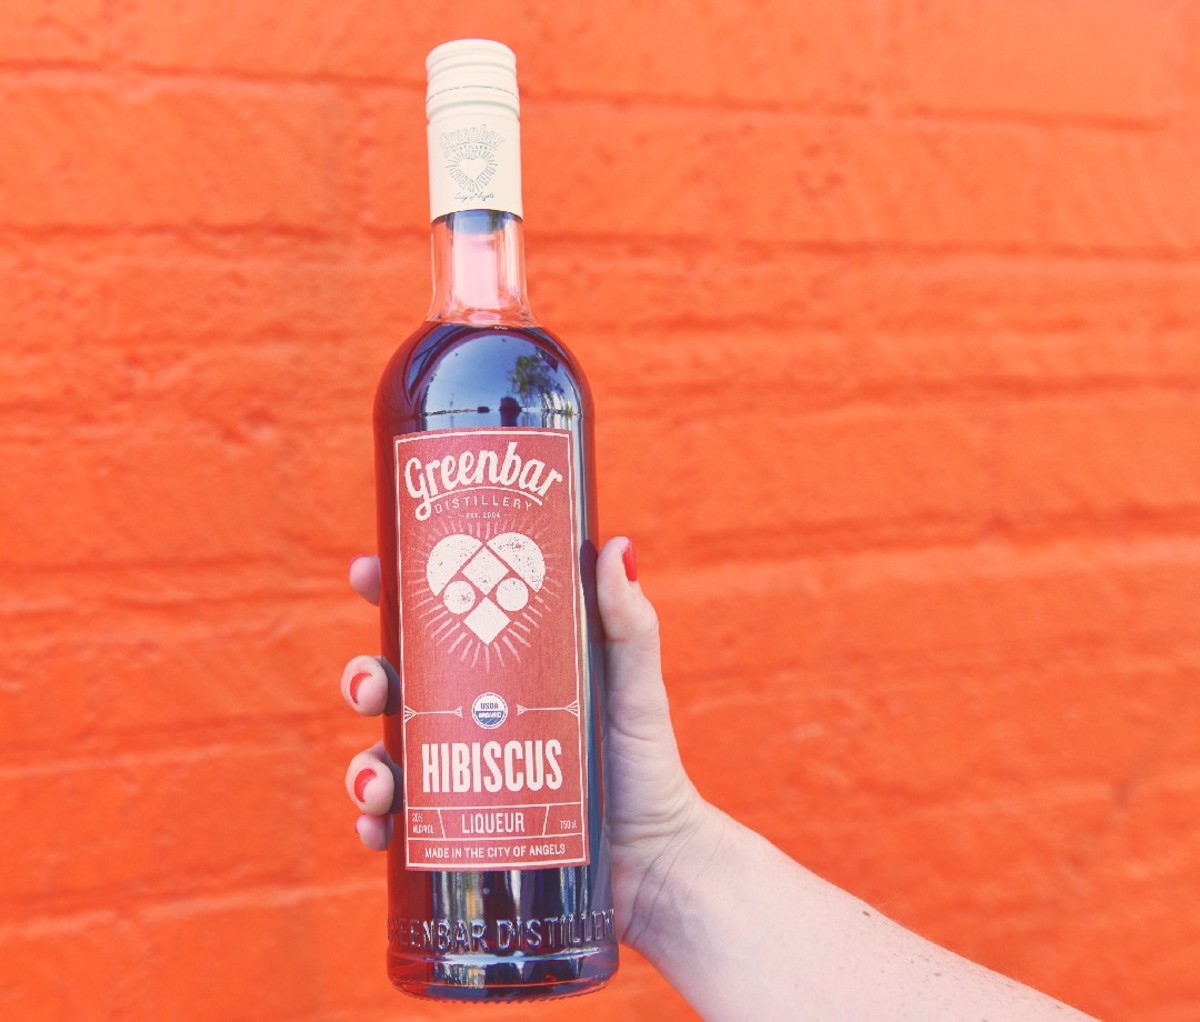 Bottle of Hibiscus Liqueur held in an outstretched hand in front of an orange wall